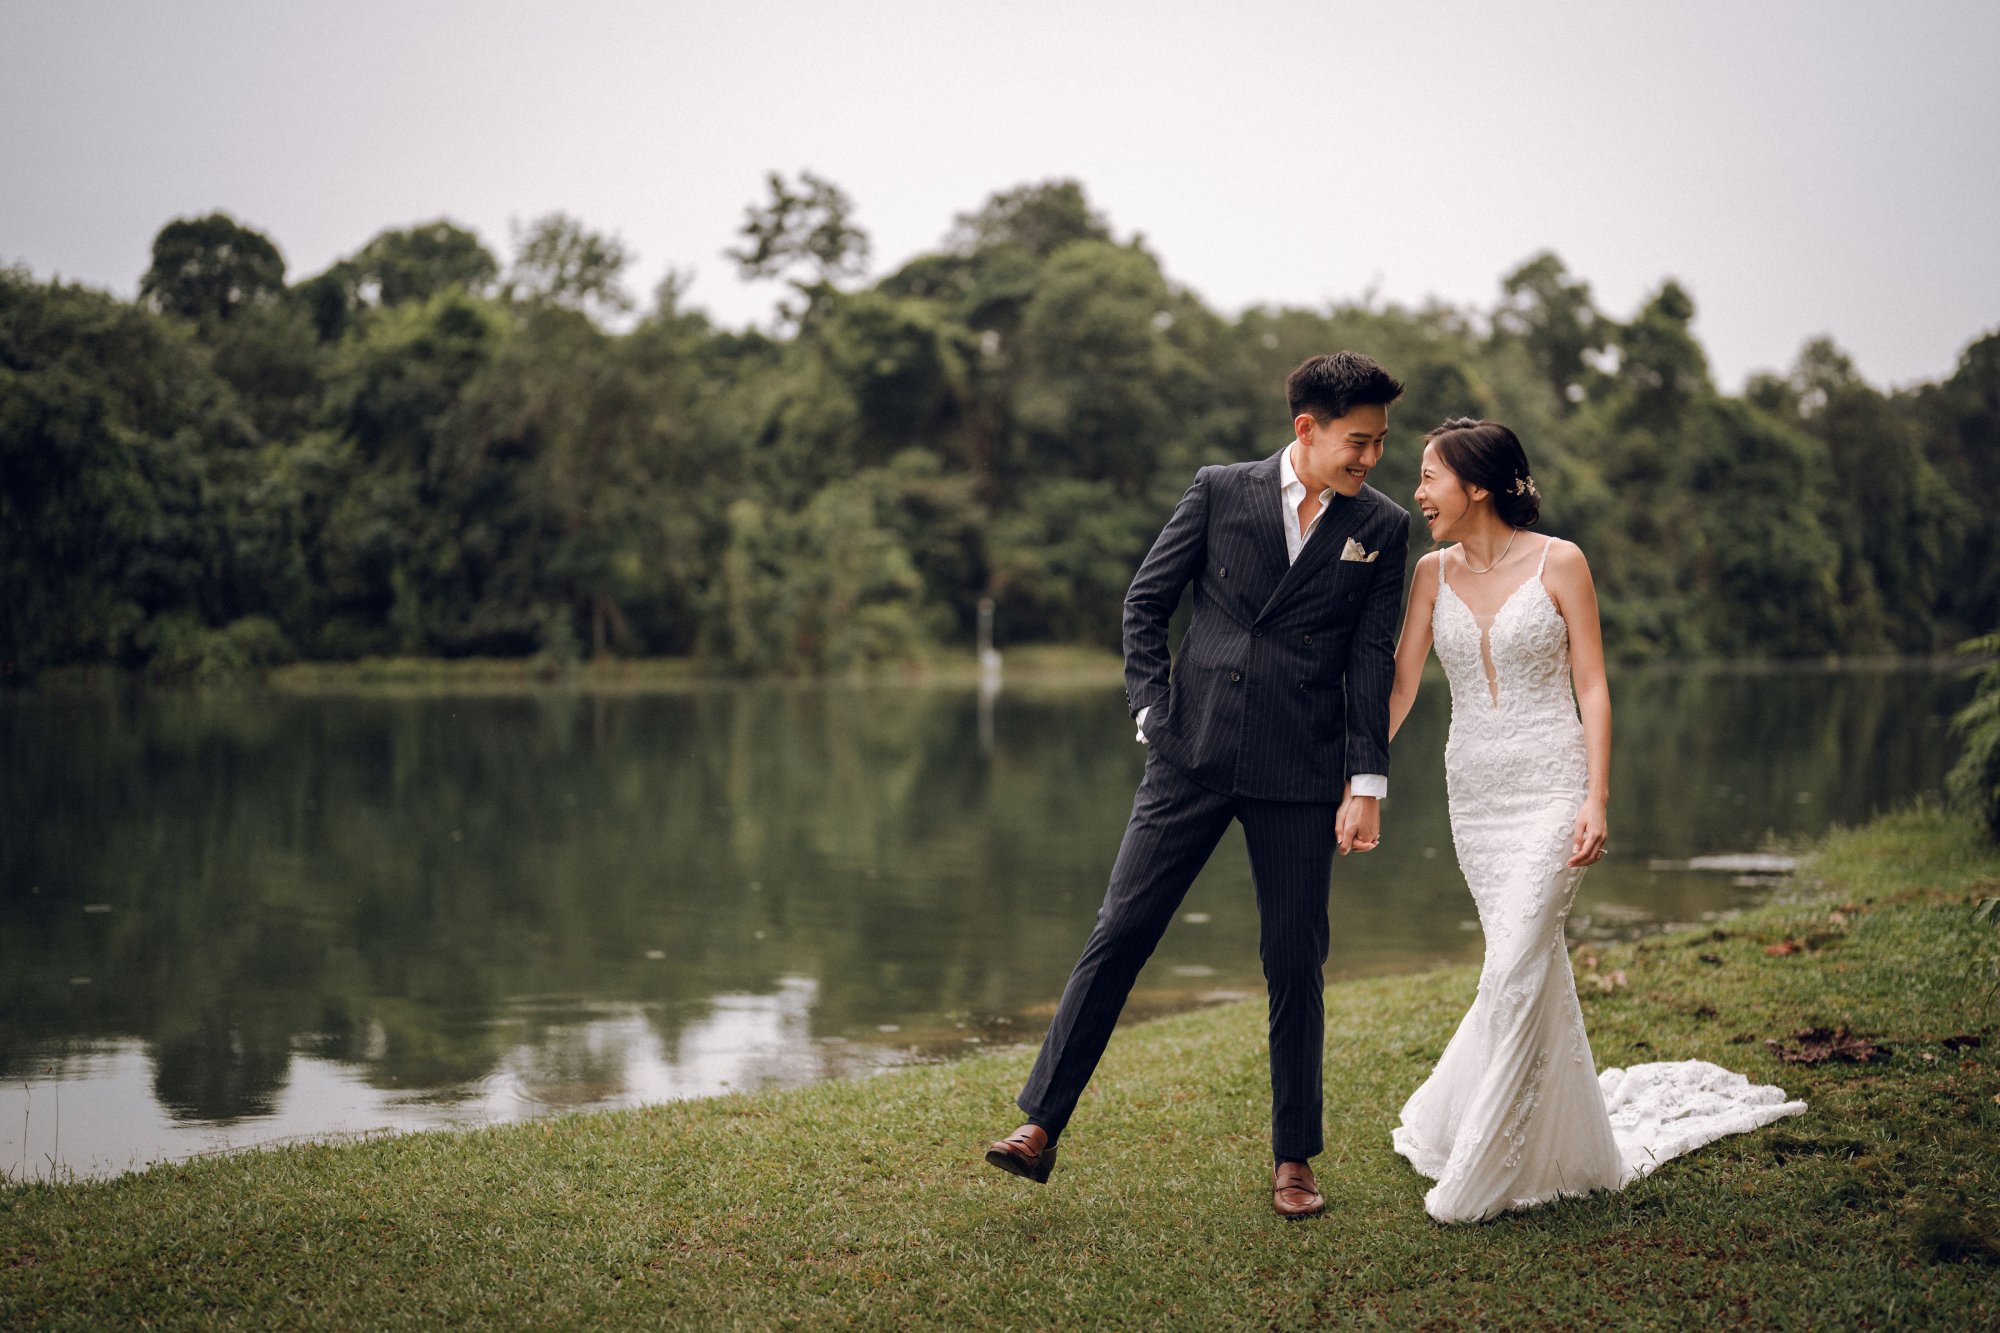 Prewedding Photoshoot At Whisky Library, Gillman Barracks And Lower Peirce Reservoir by Michael on OneThreeOneFour 38